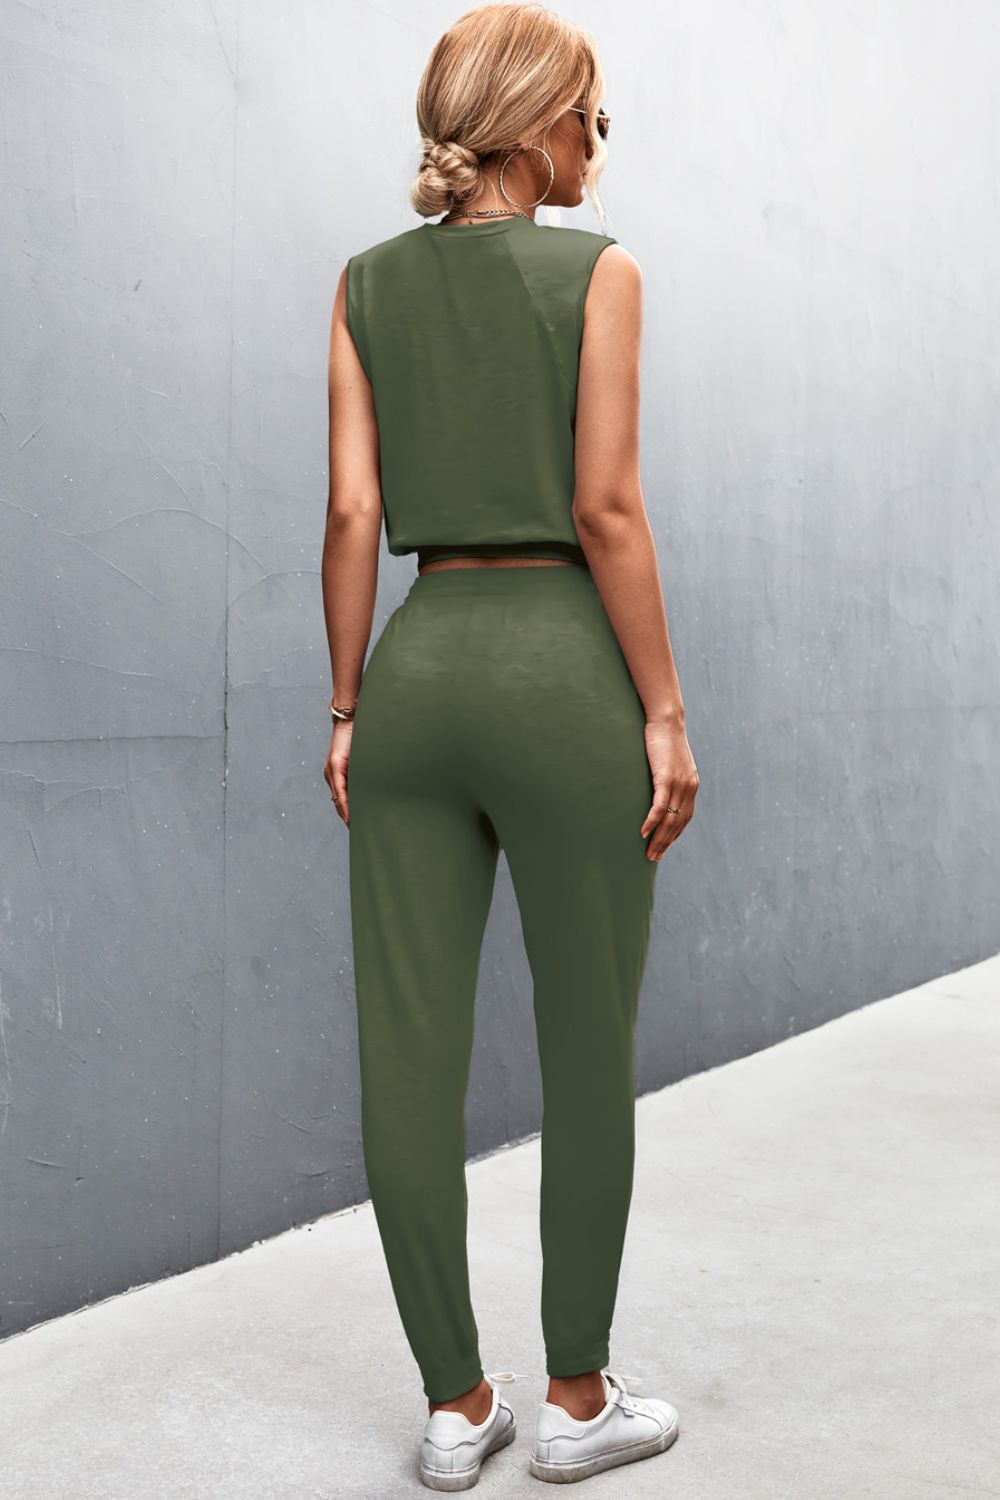 Villa Blvd Sleeveless Top and Joggers Set ☛ Multiple Colors Available ☚